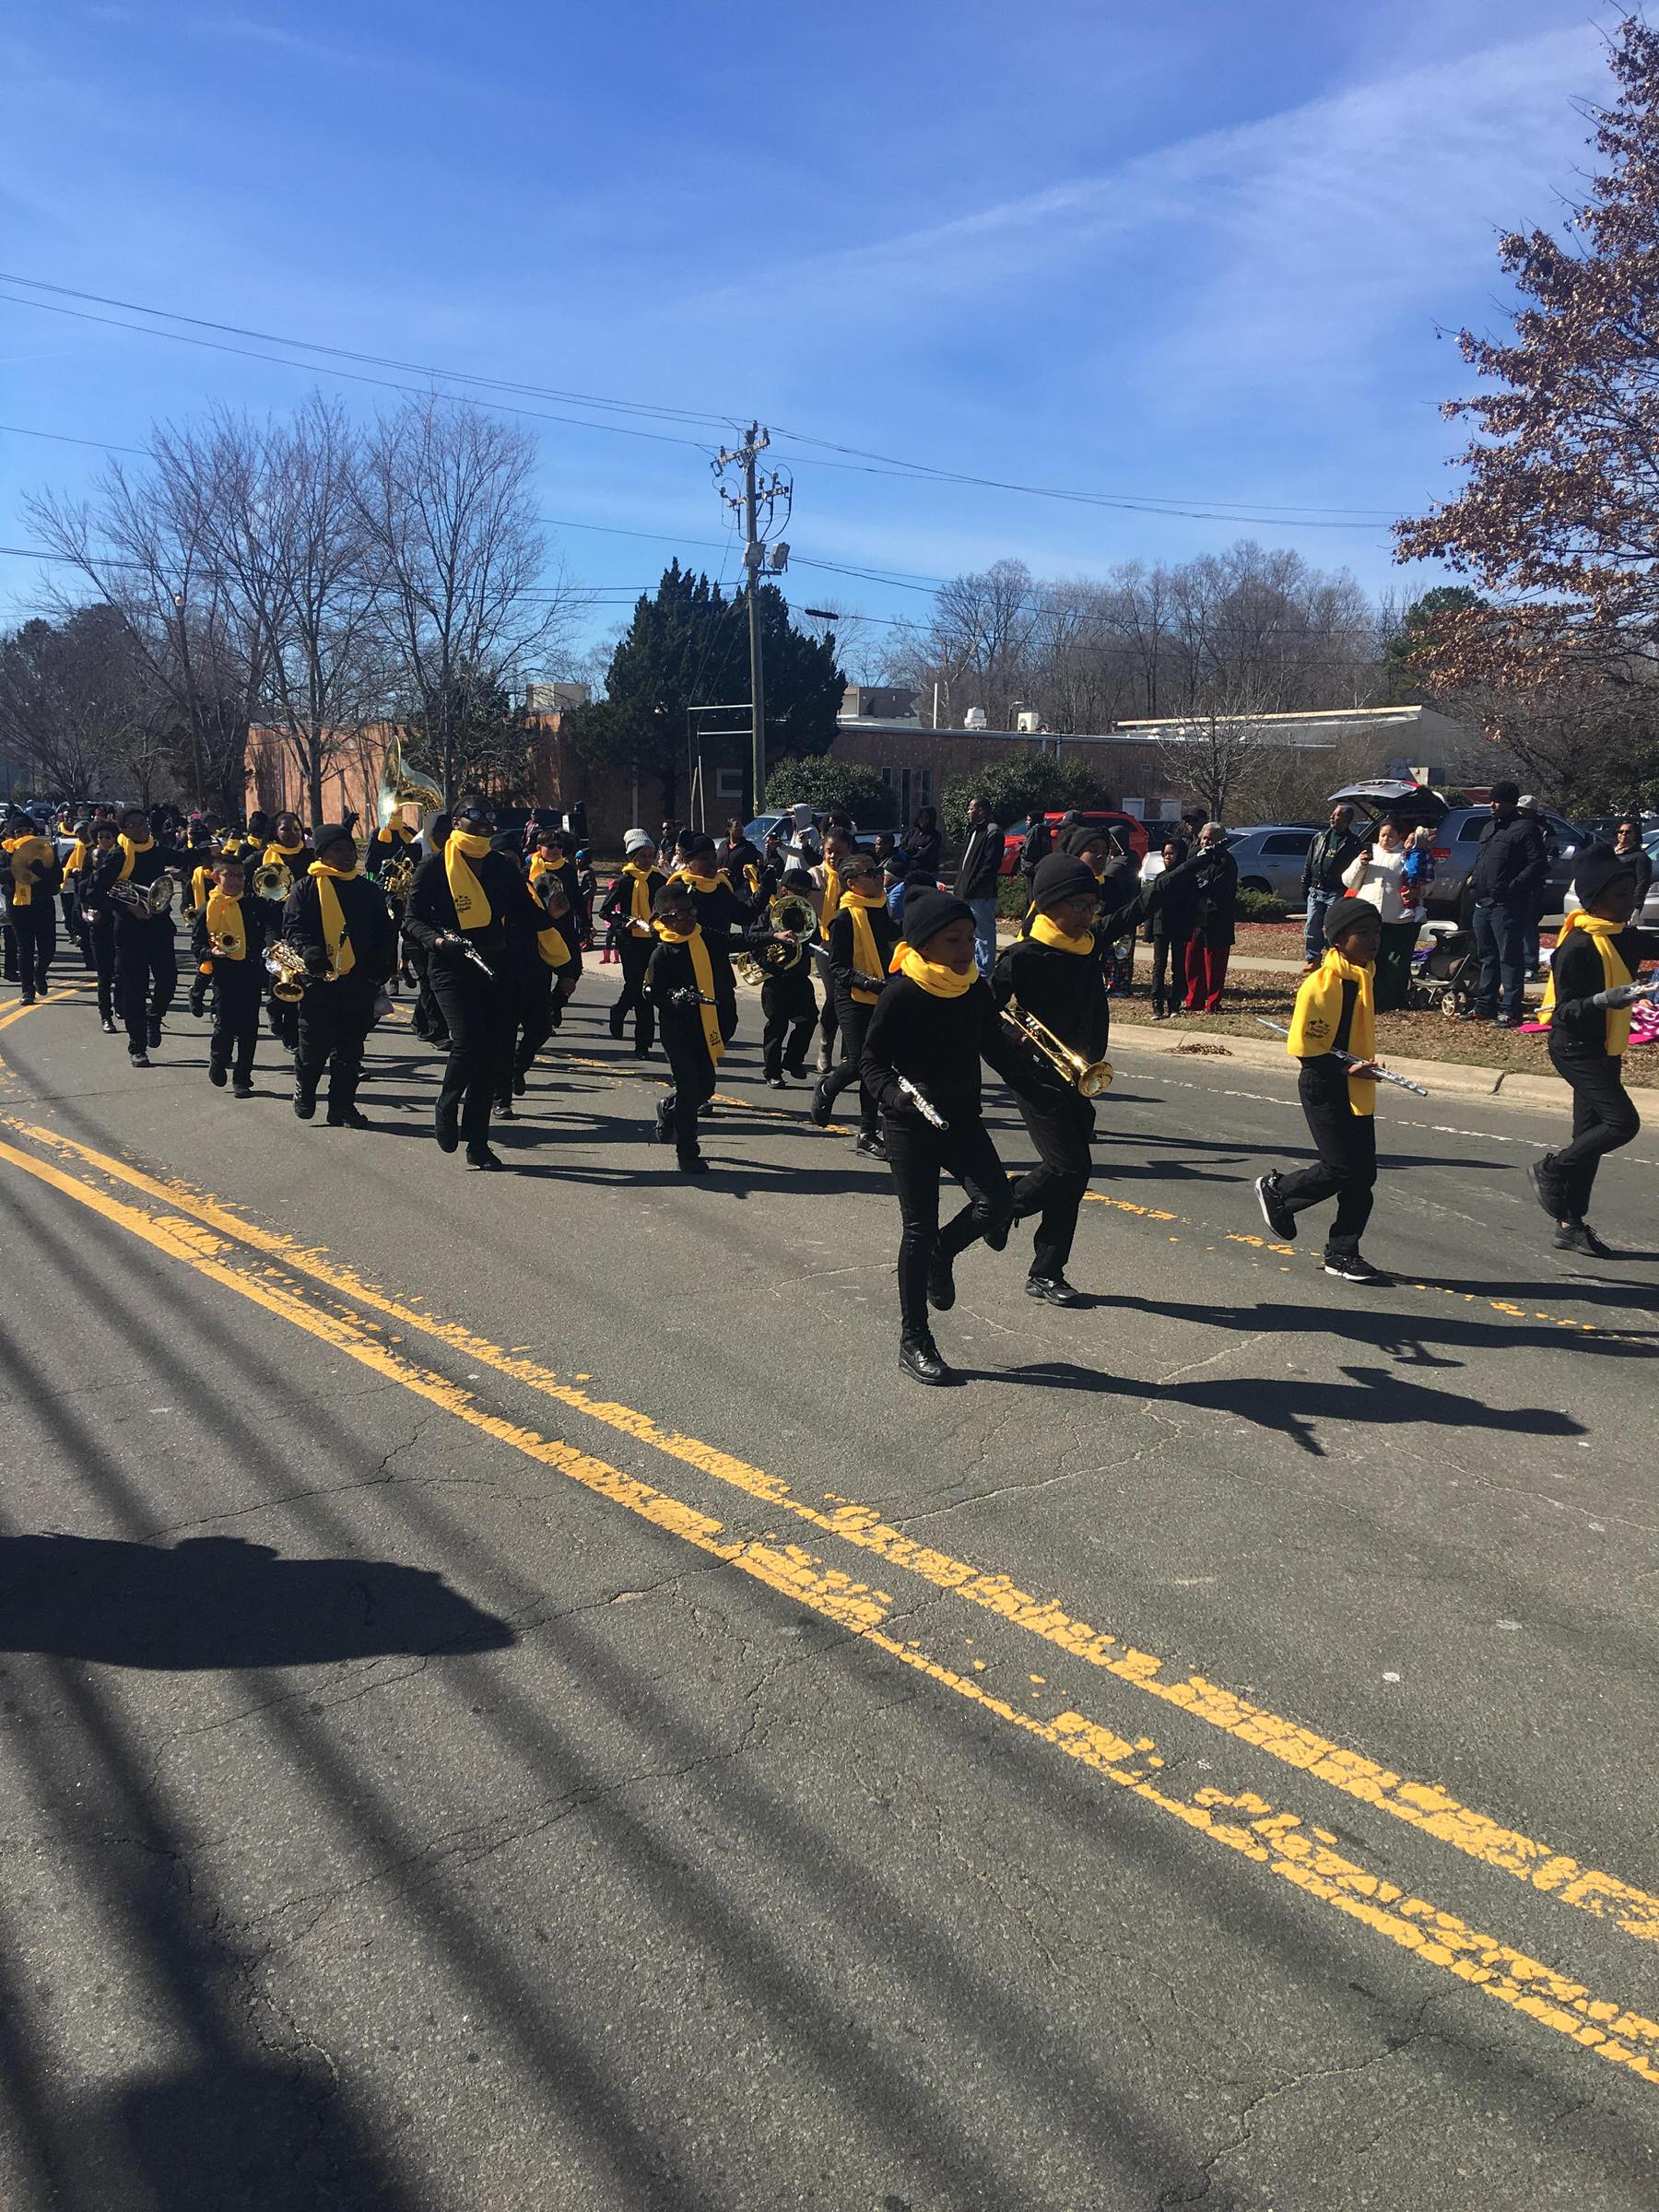 Marching band through town - Research Triangle Charter Academy, Durham, NC